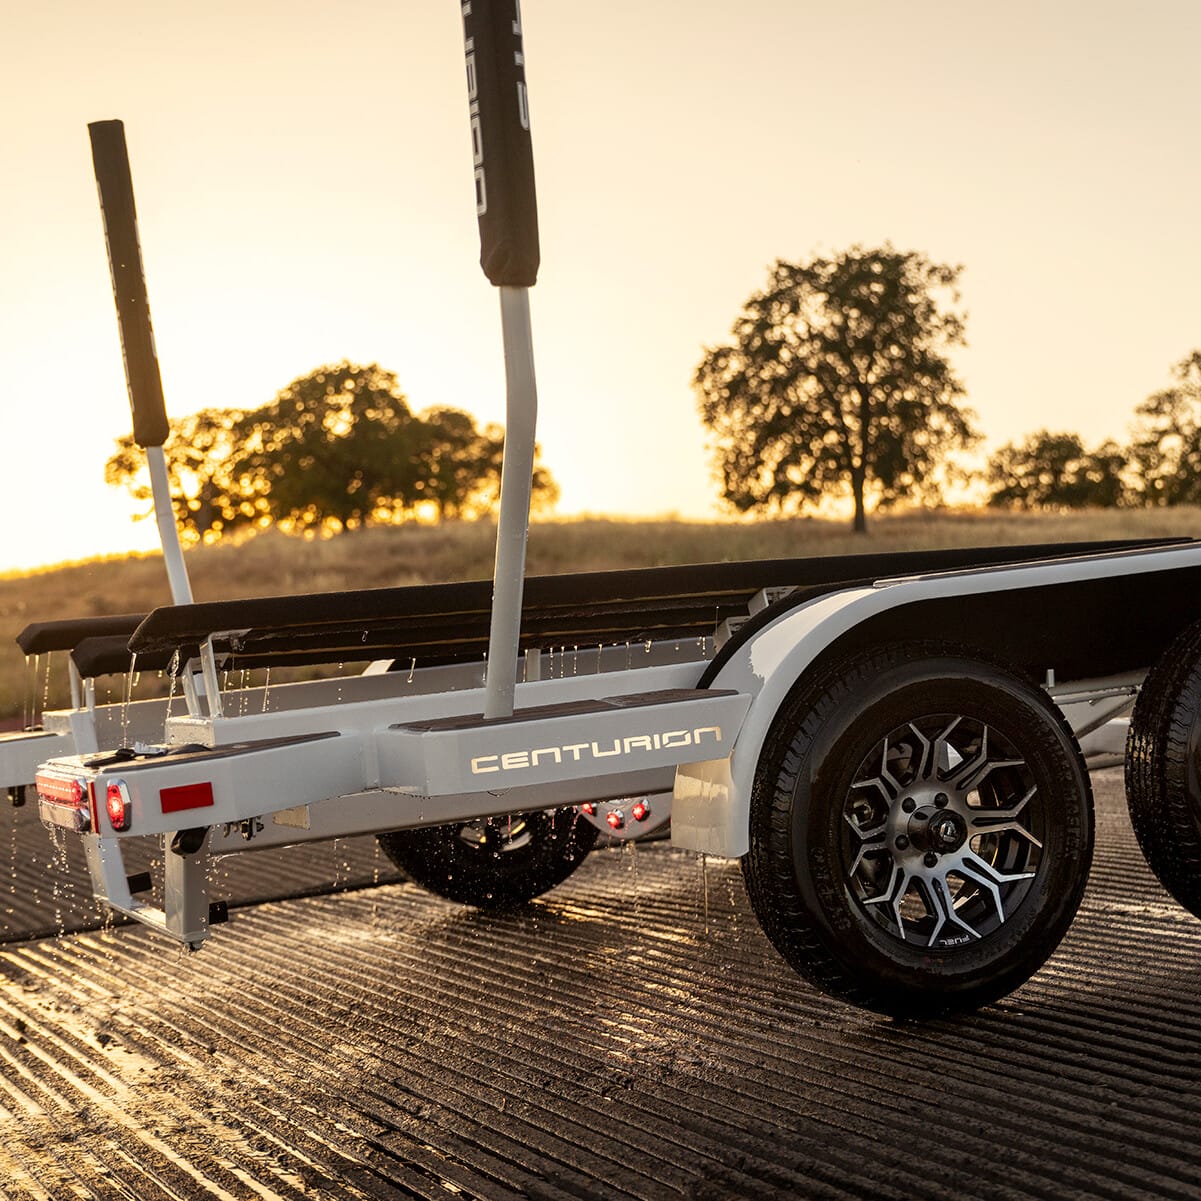 A white Centurion trailer with double axles sits on a grooved ramp at sunset, with trees visible in the background.